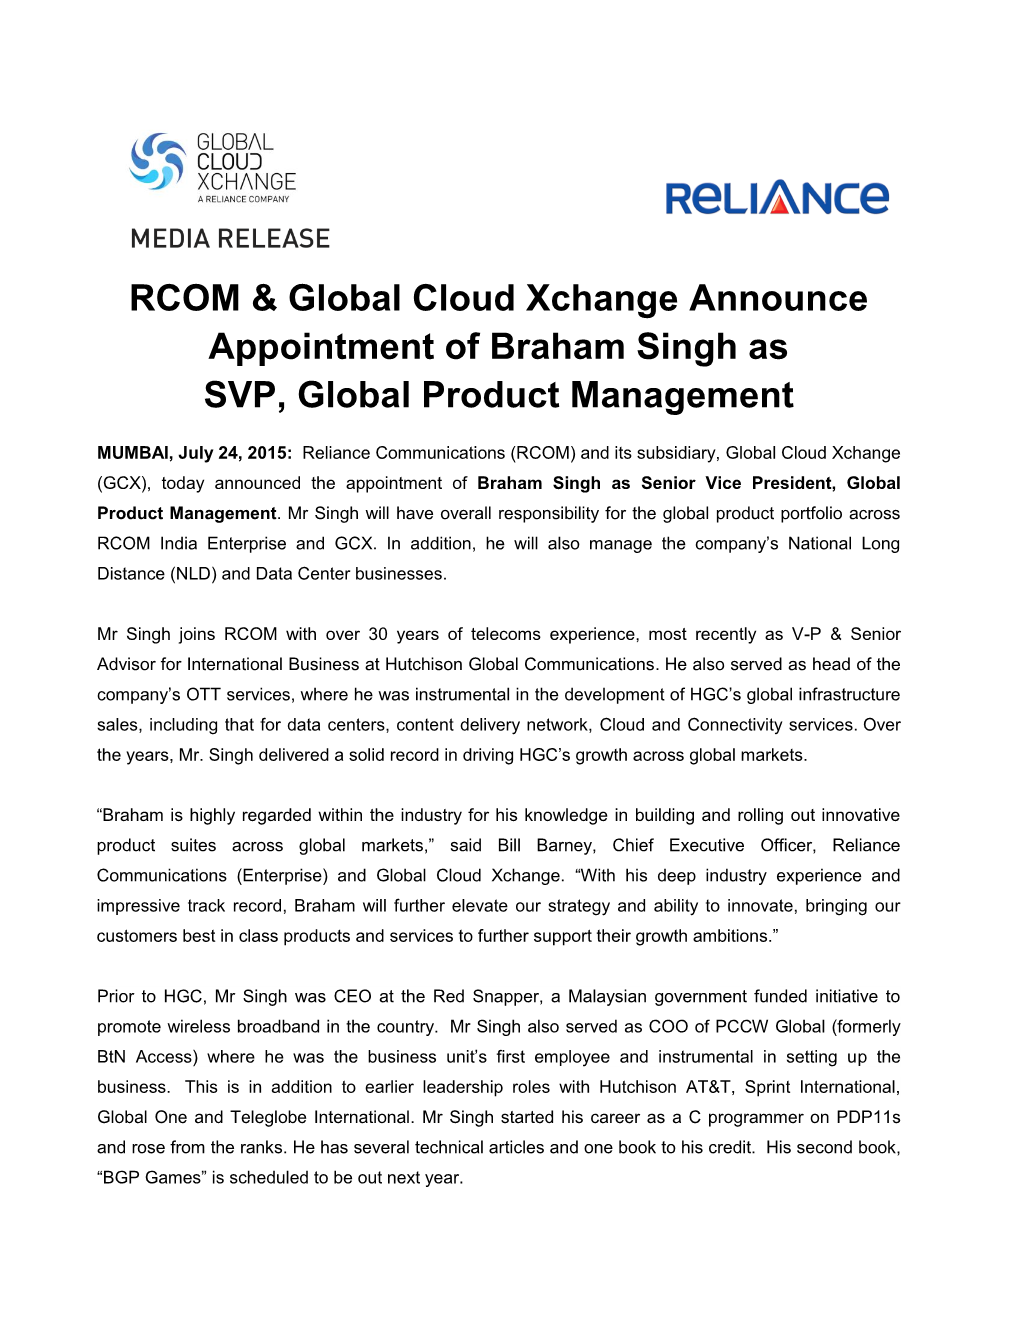 RCOM & Global Cloud Xchange Announce Appointment of Braham Singh As SVP, Global Product Management